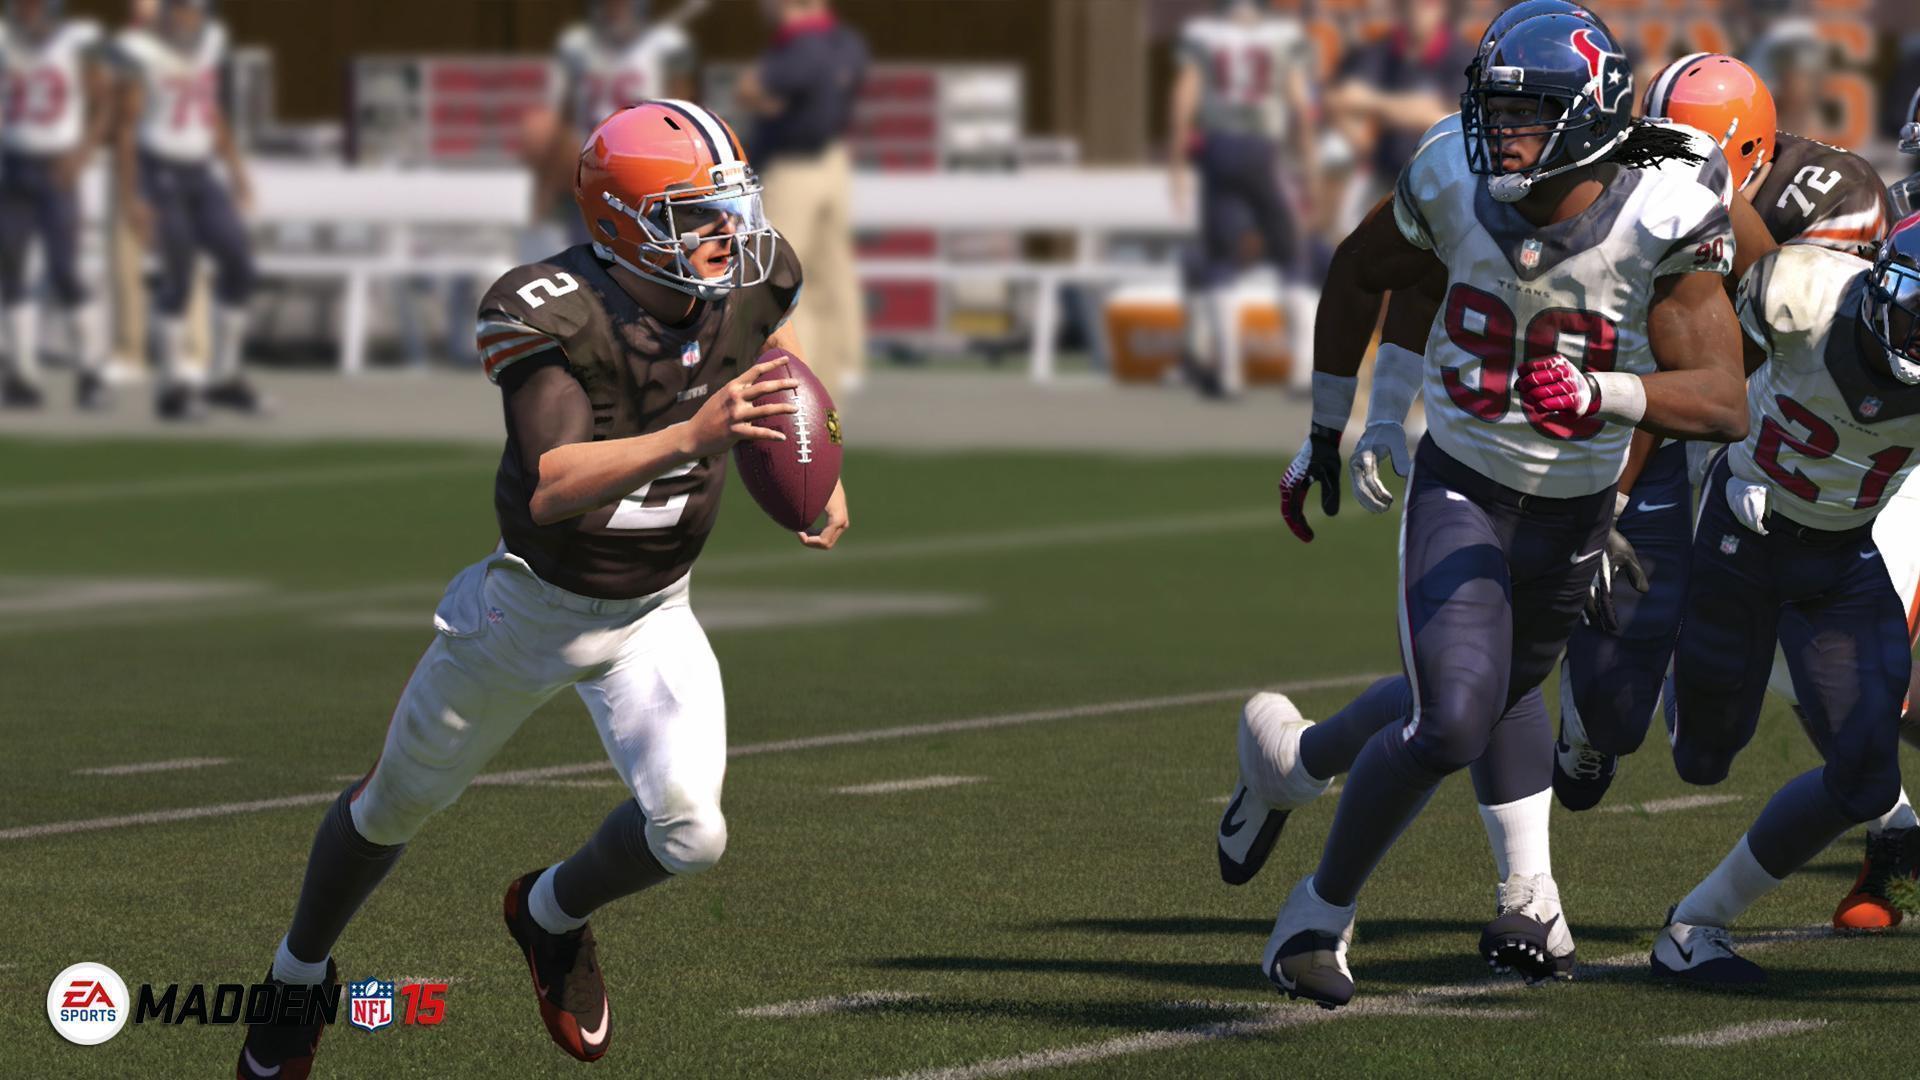 Madden Nfl 15 Screen 20.png